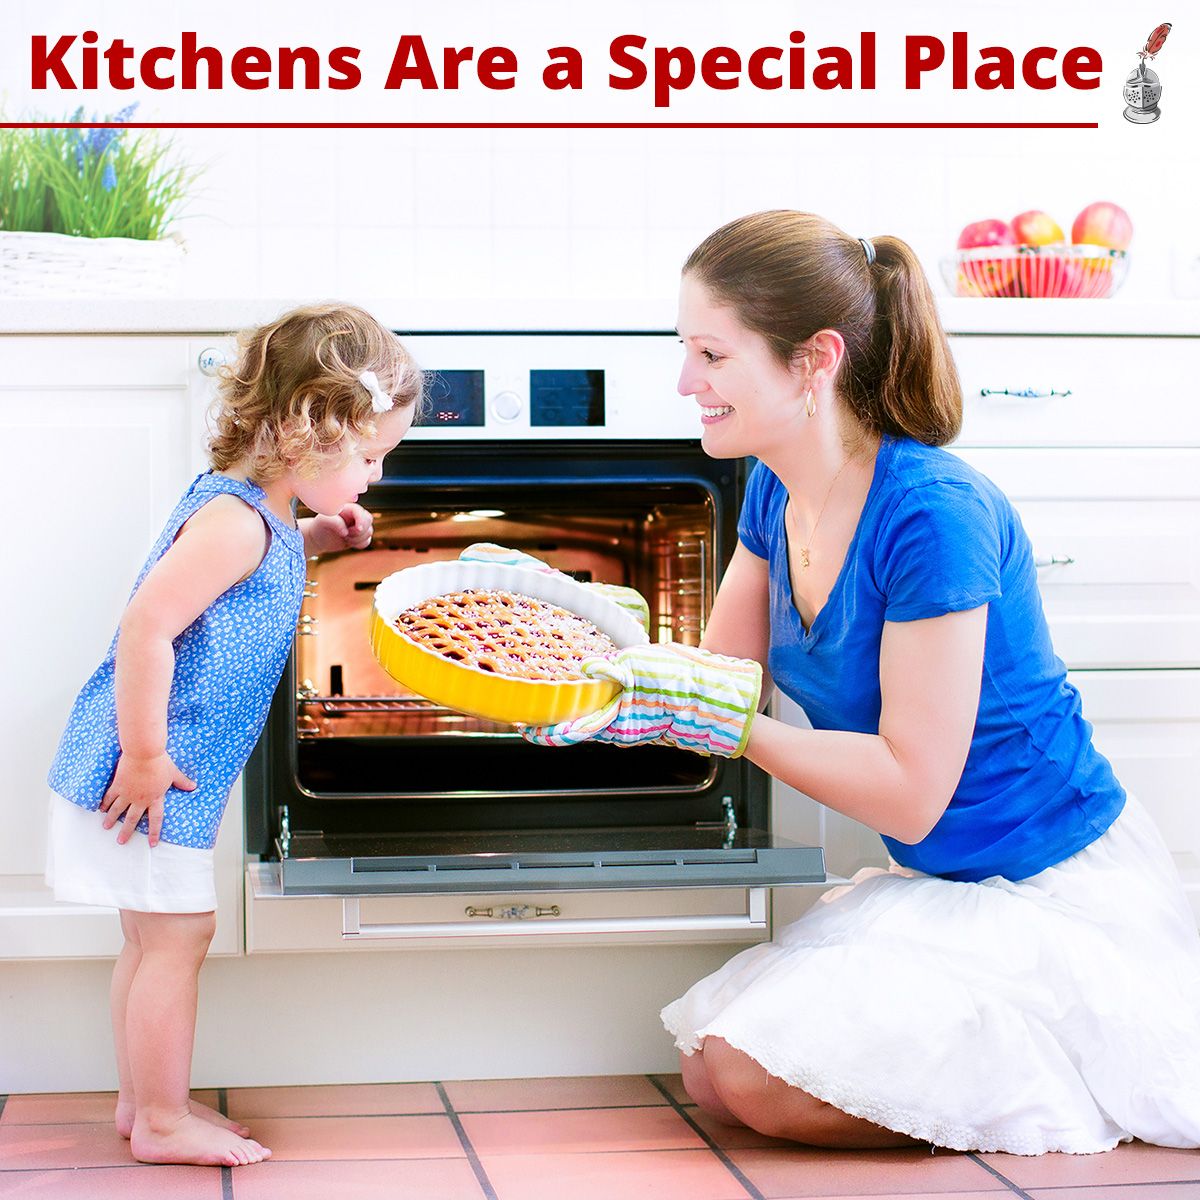 Kitchens Are a Special Place